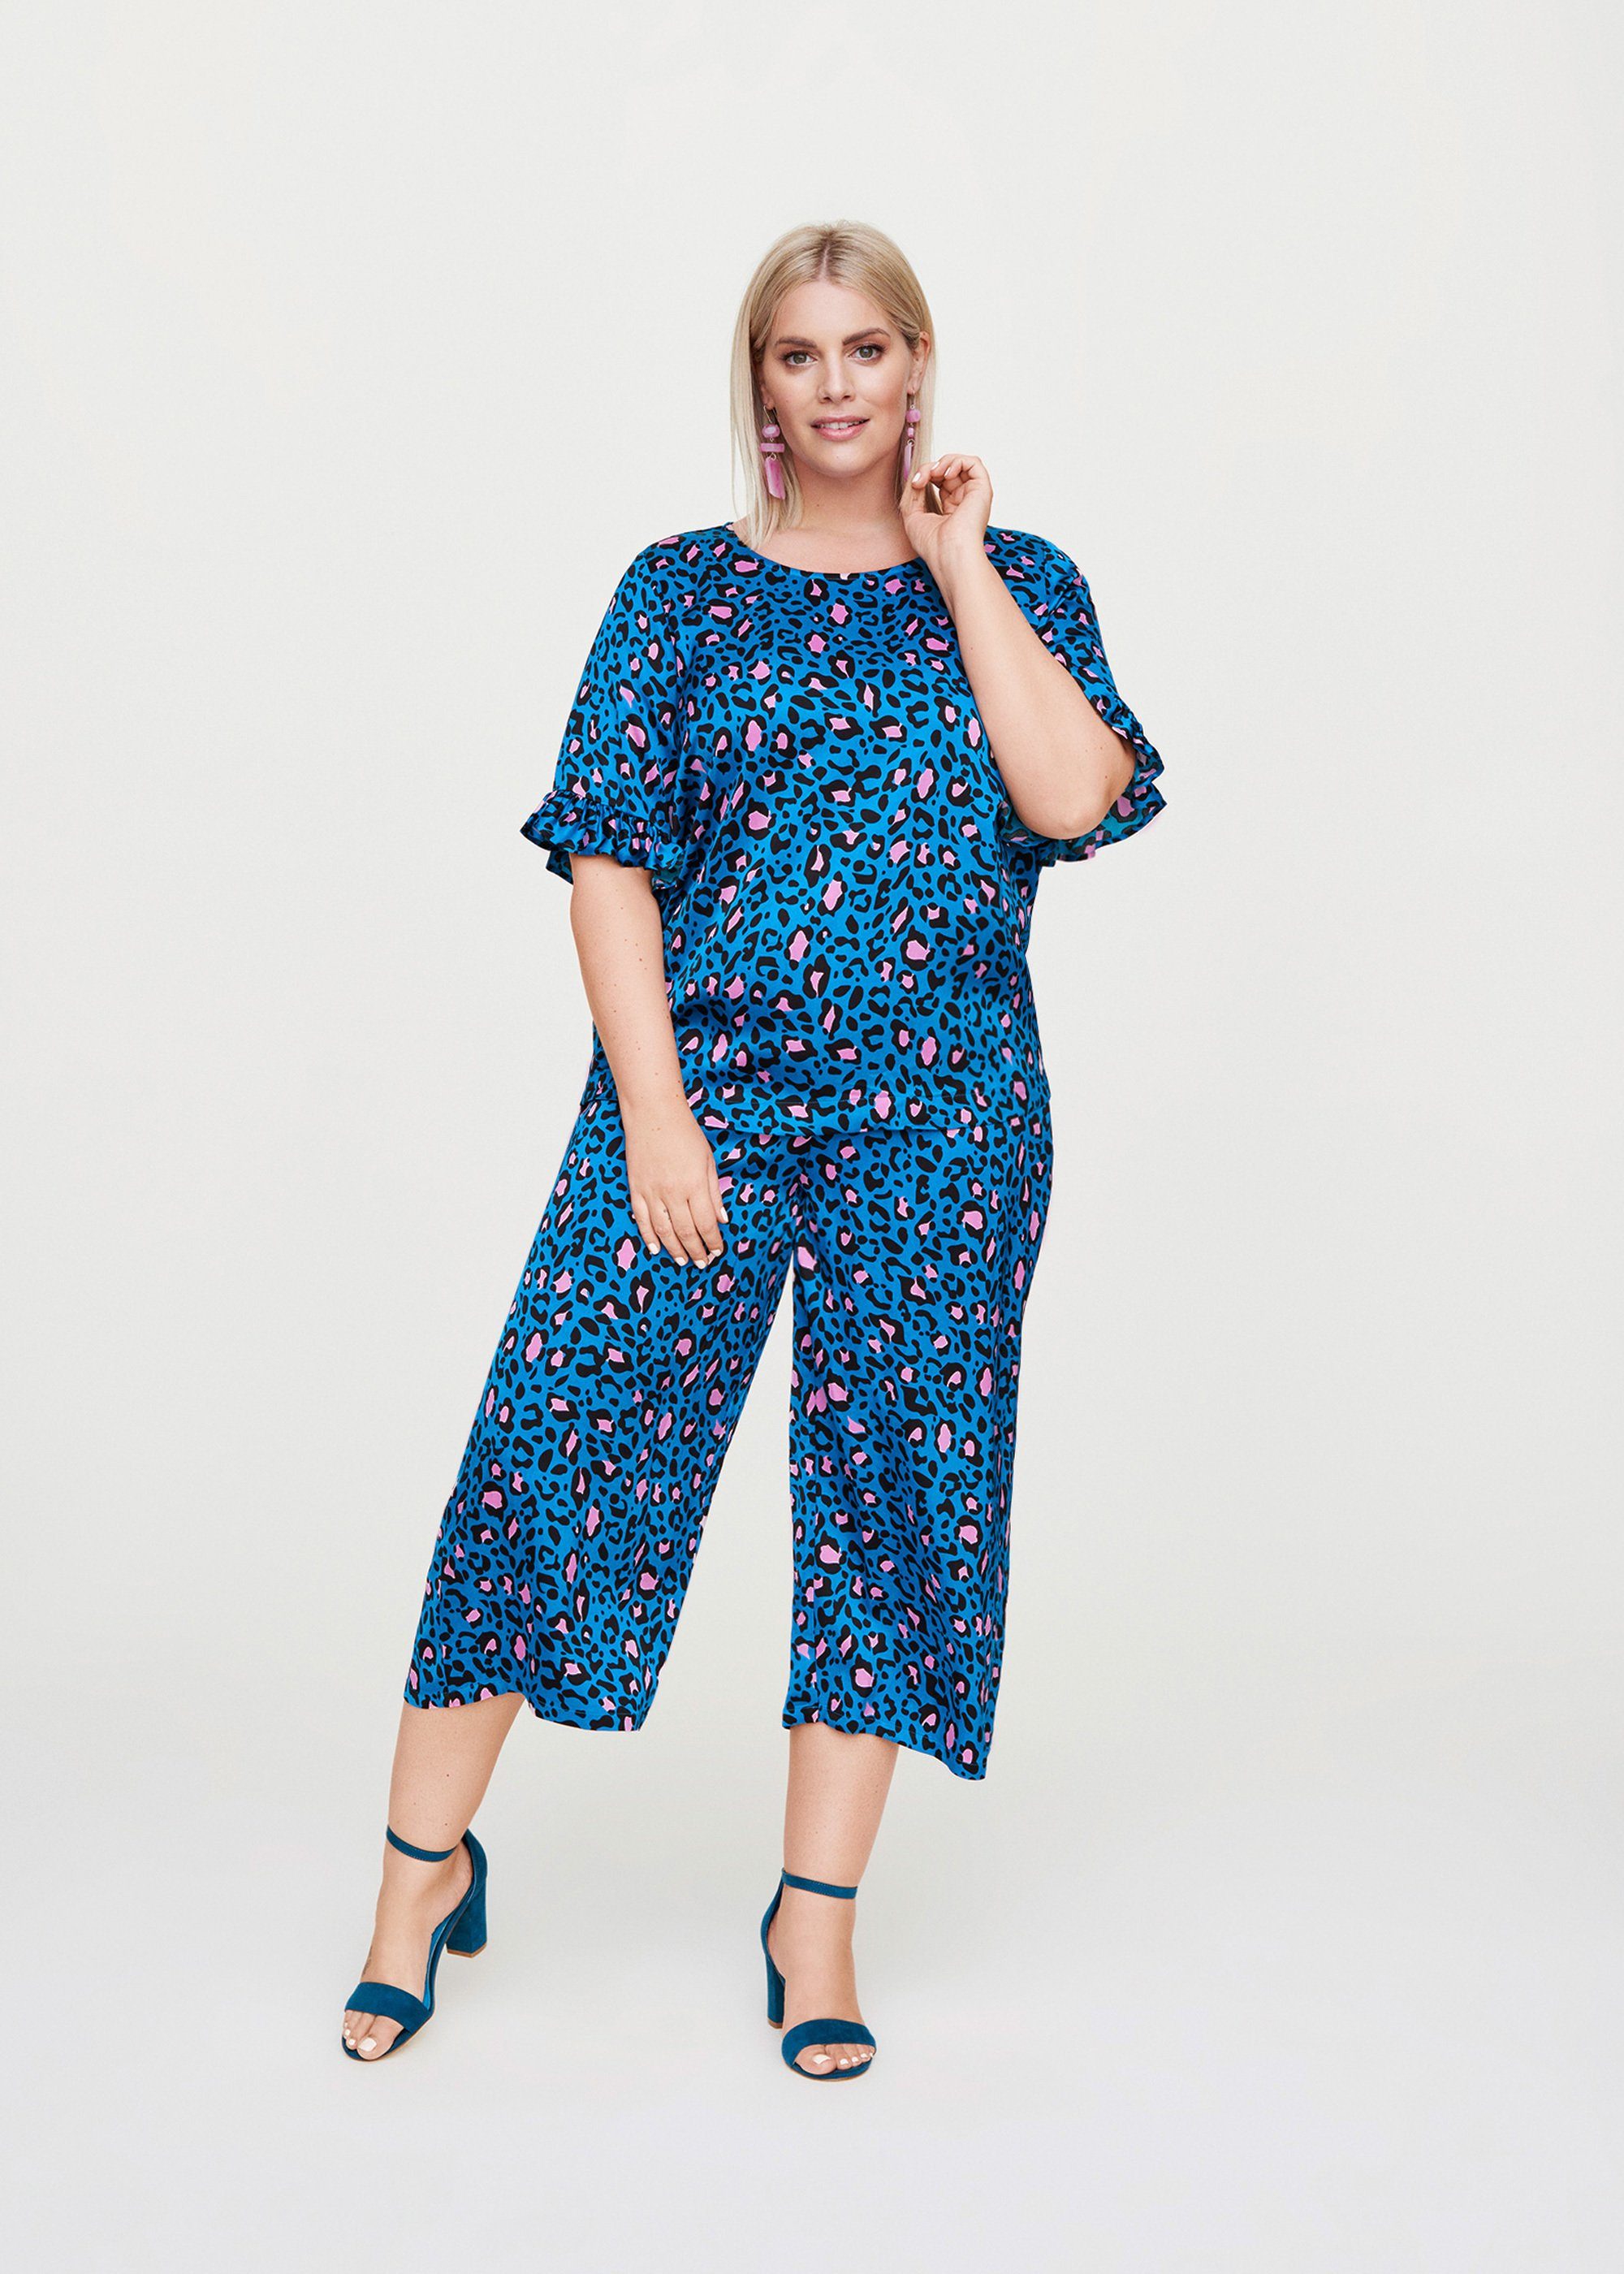 K. Angelina by Curves Rock Blau Your Culotte